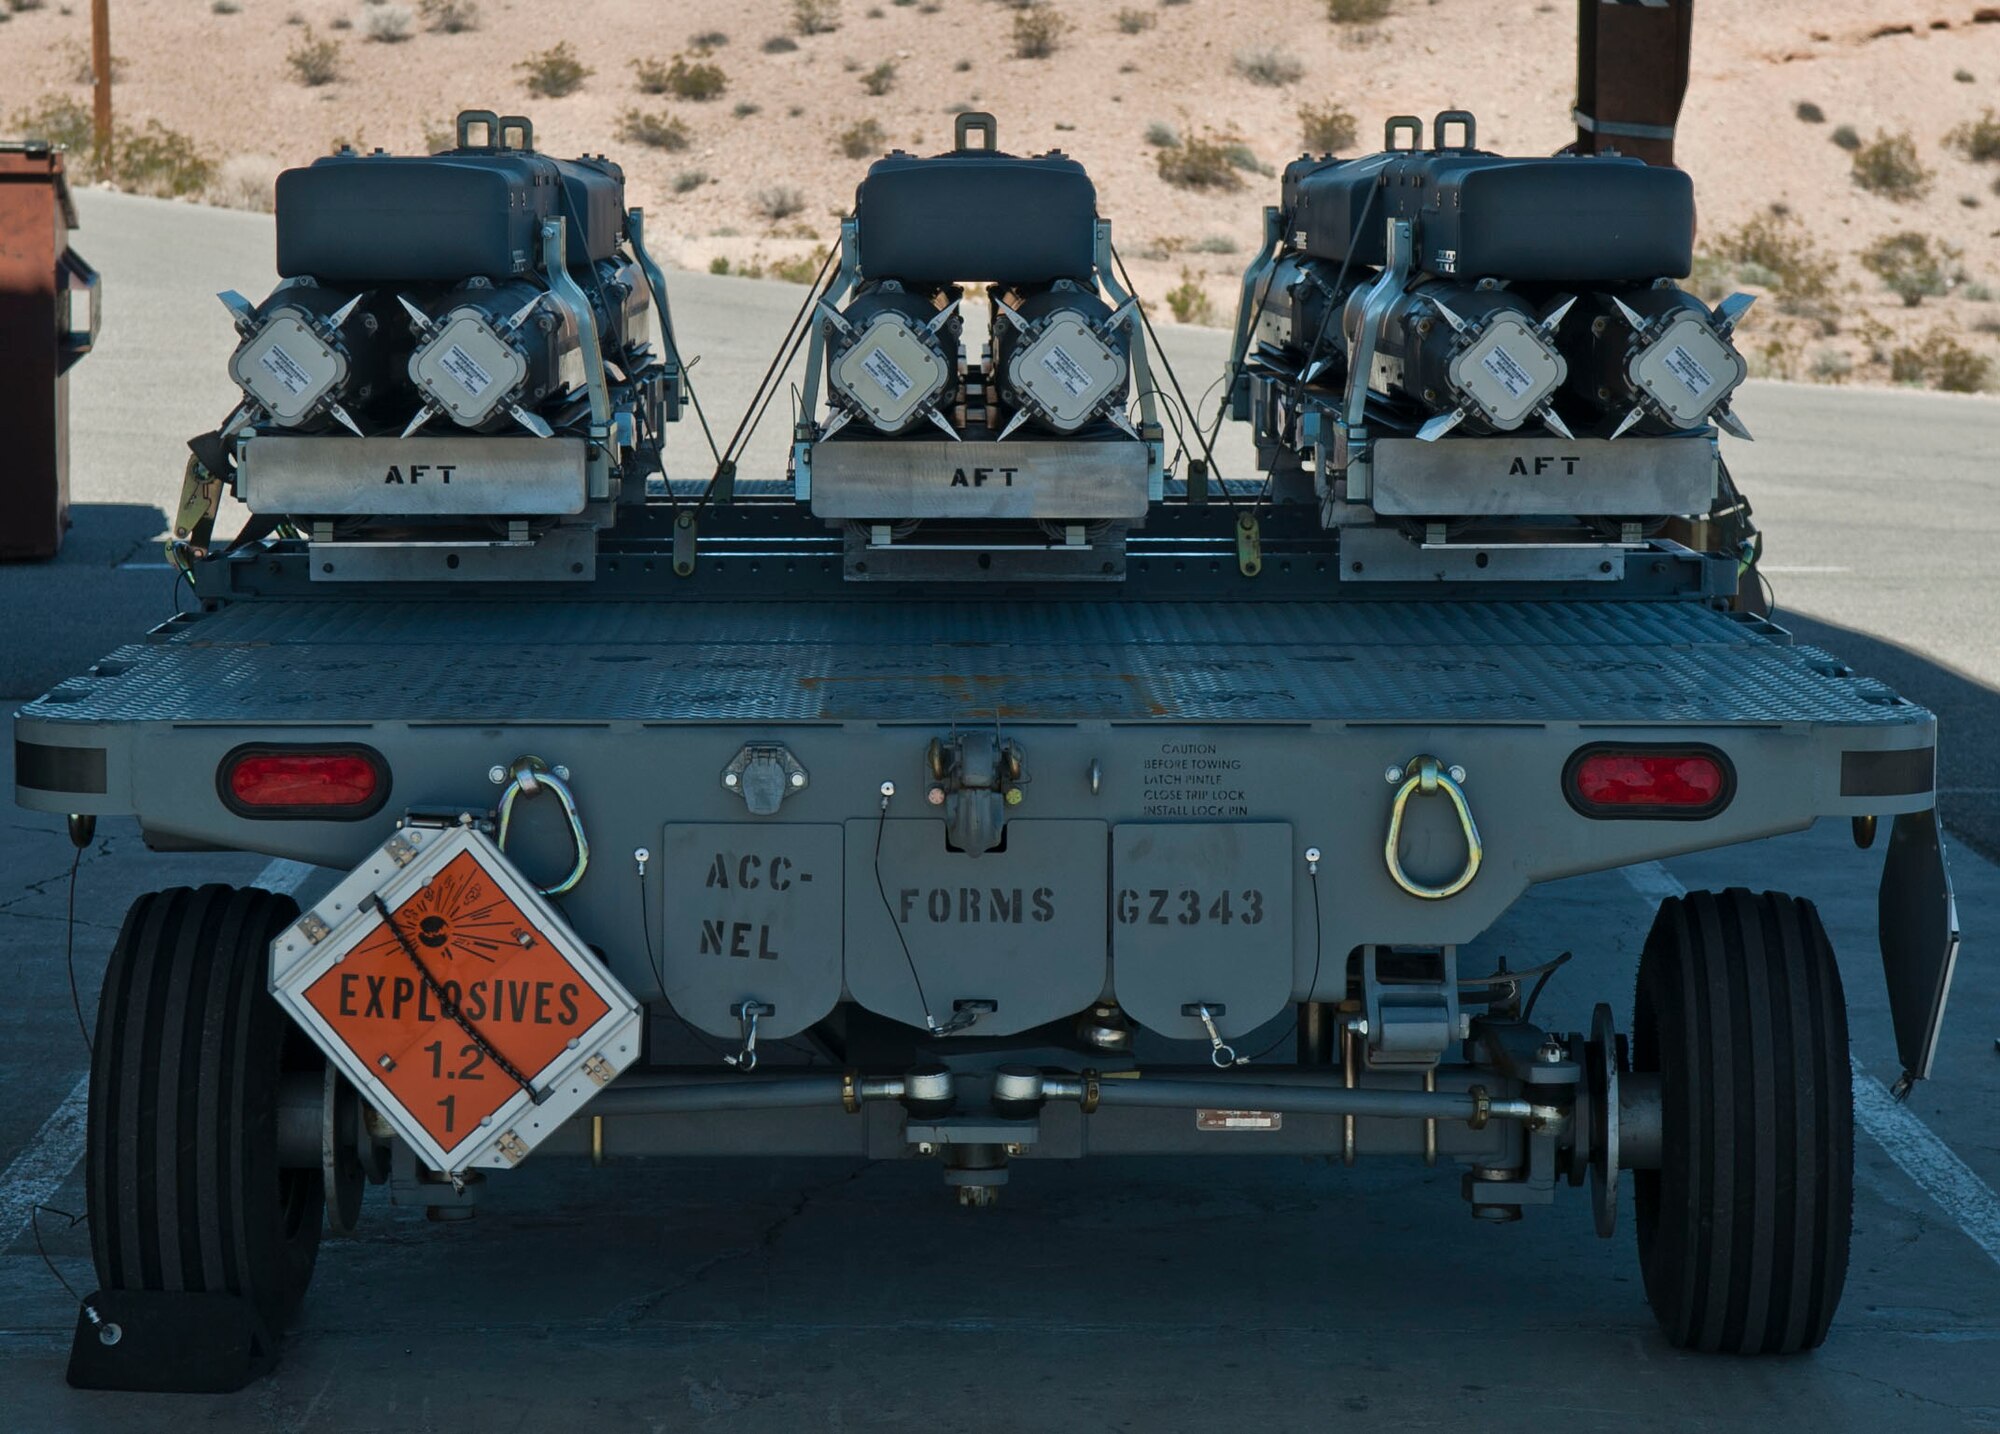 Munitions ready to be taken to the flightline sit on a trailer, or mod, at the munitions storage area at Nellis Air Force Base, Nev., March 5, 2015. Munitions need to be received, processed and prepared before they can be attached to the aircraft.  (U.S. Air Force photo by airman 1st Class Mikaley Towle)